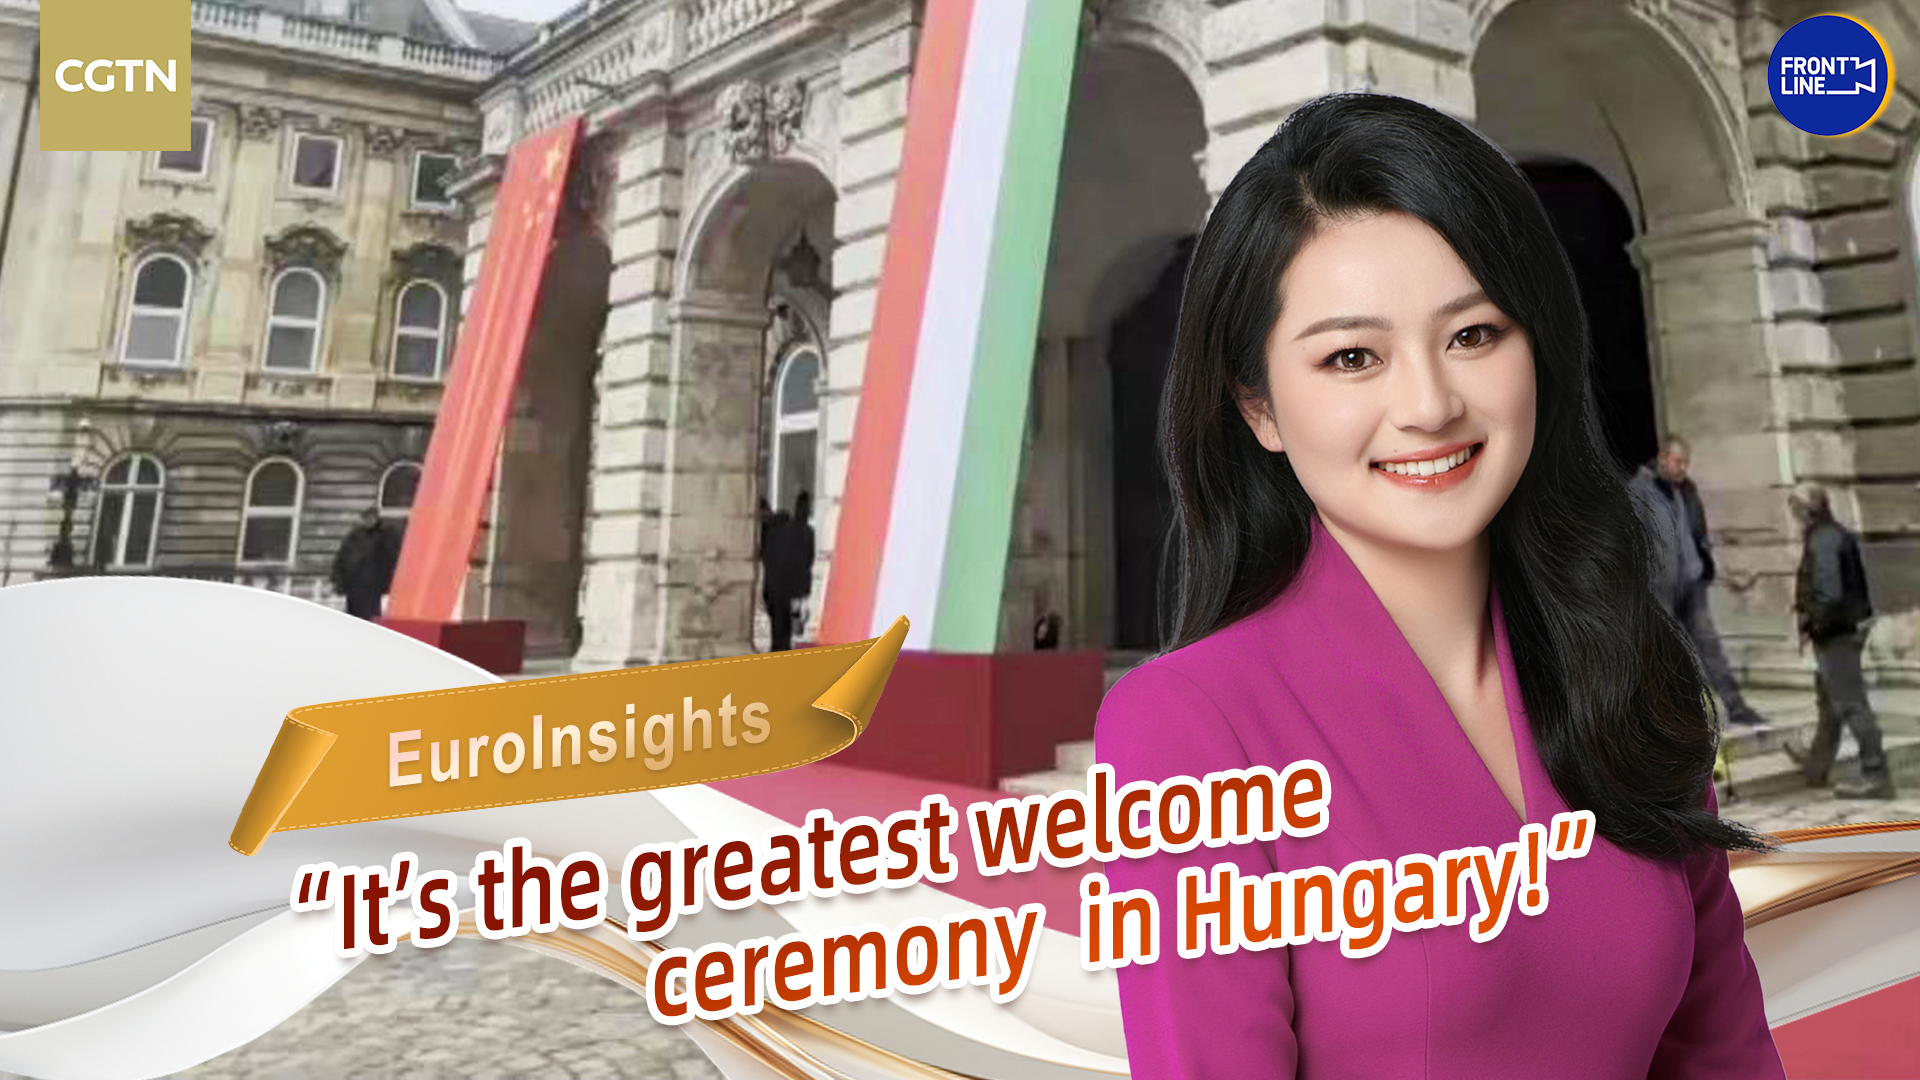 The greatest welcome ceremony in Hungary? Absolutely!